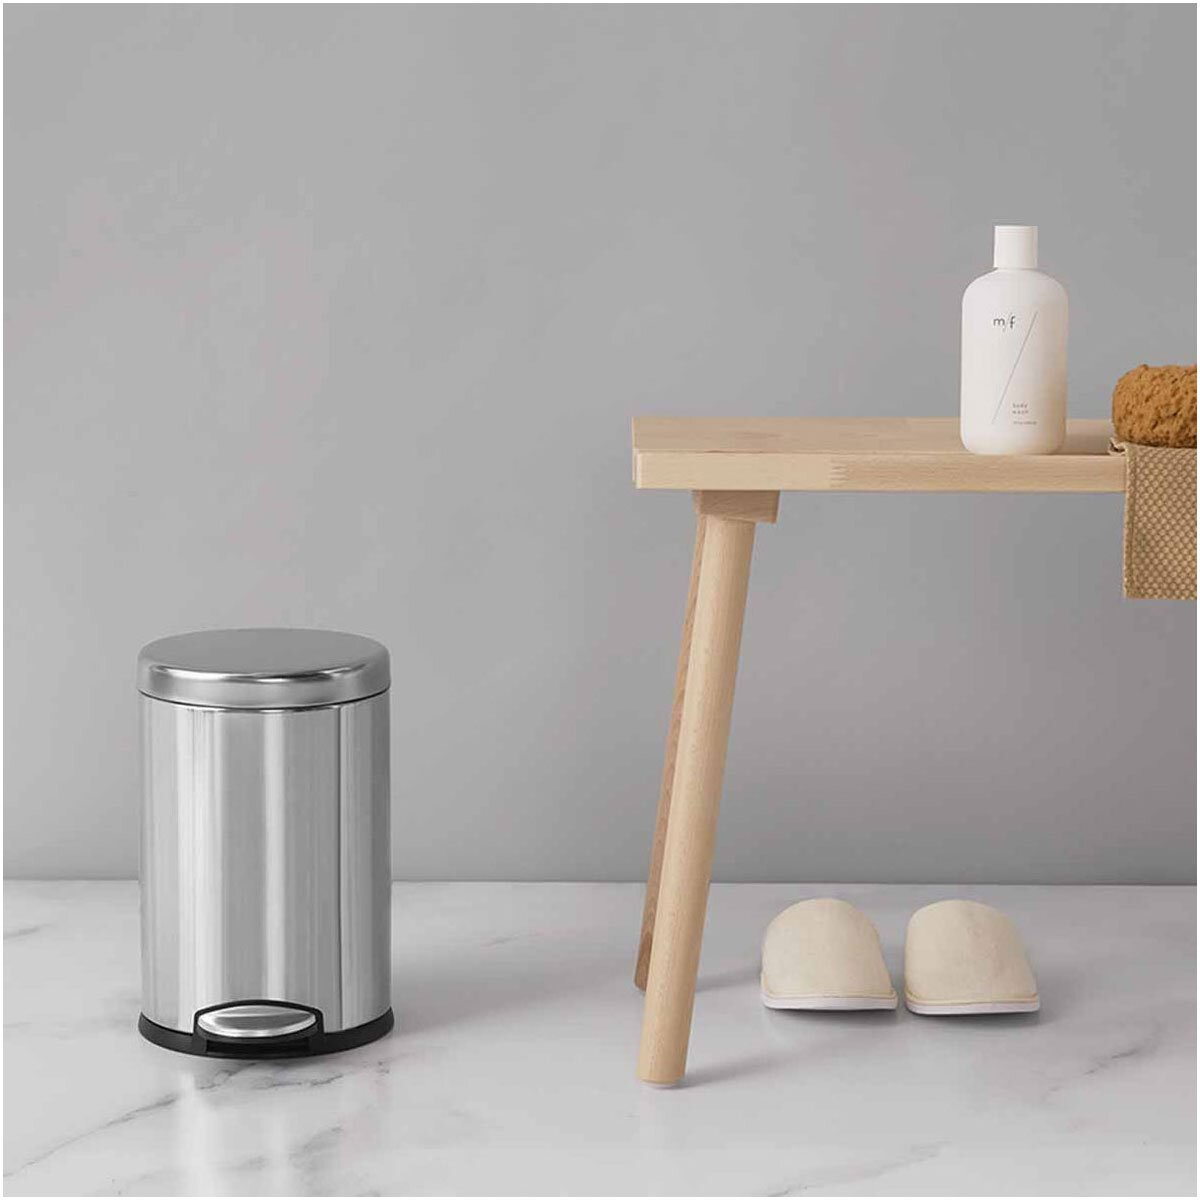 lifestyle image of 3L round pedal bin